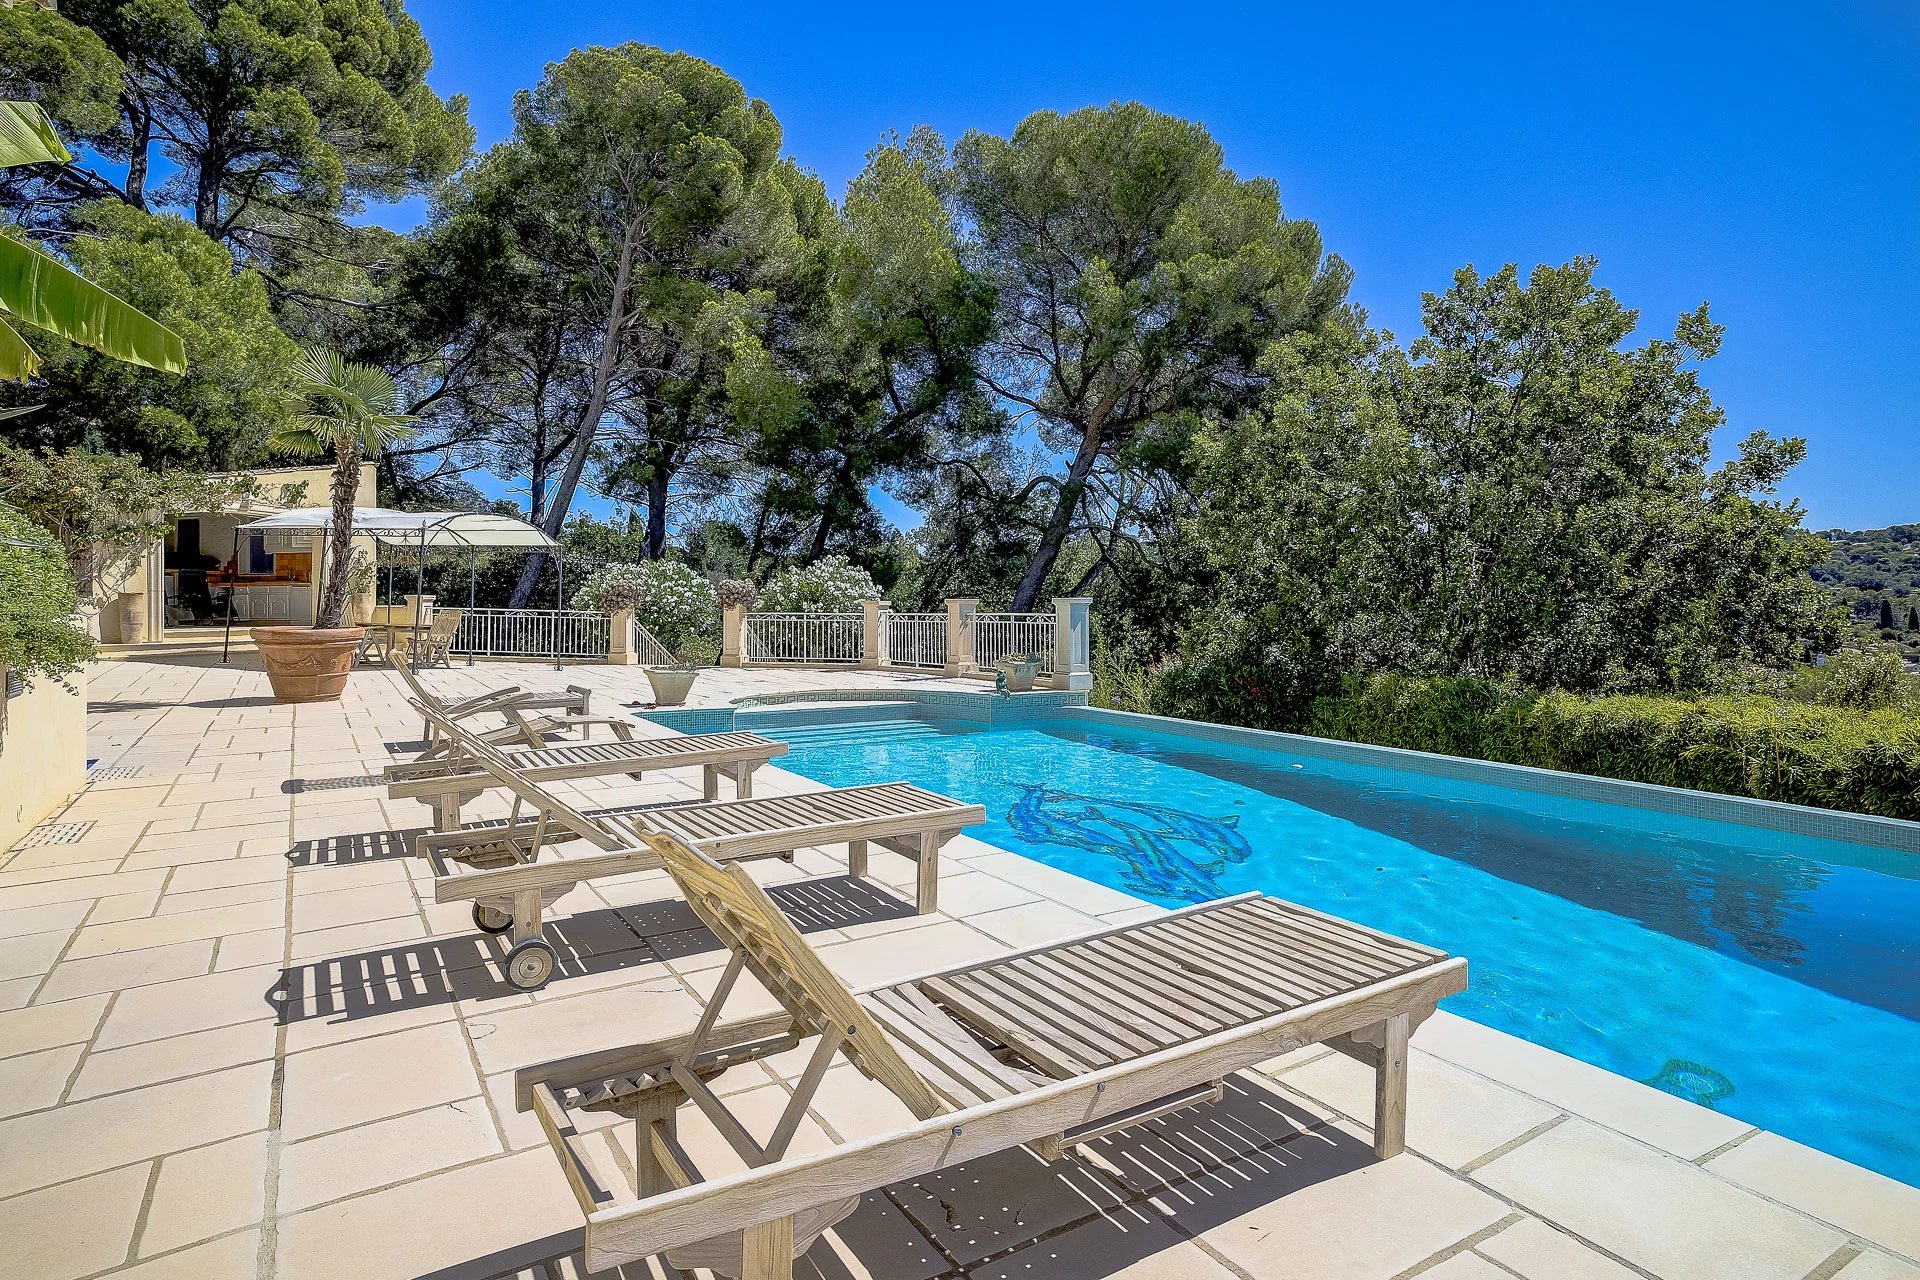 Magnificent Provencal property near the village of Mougins